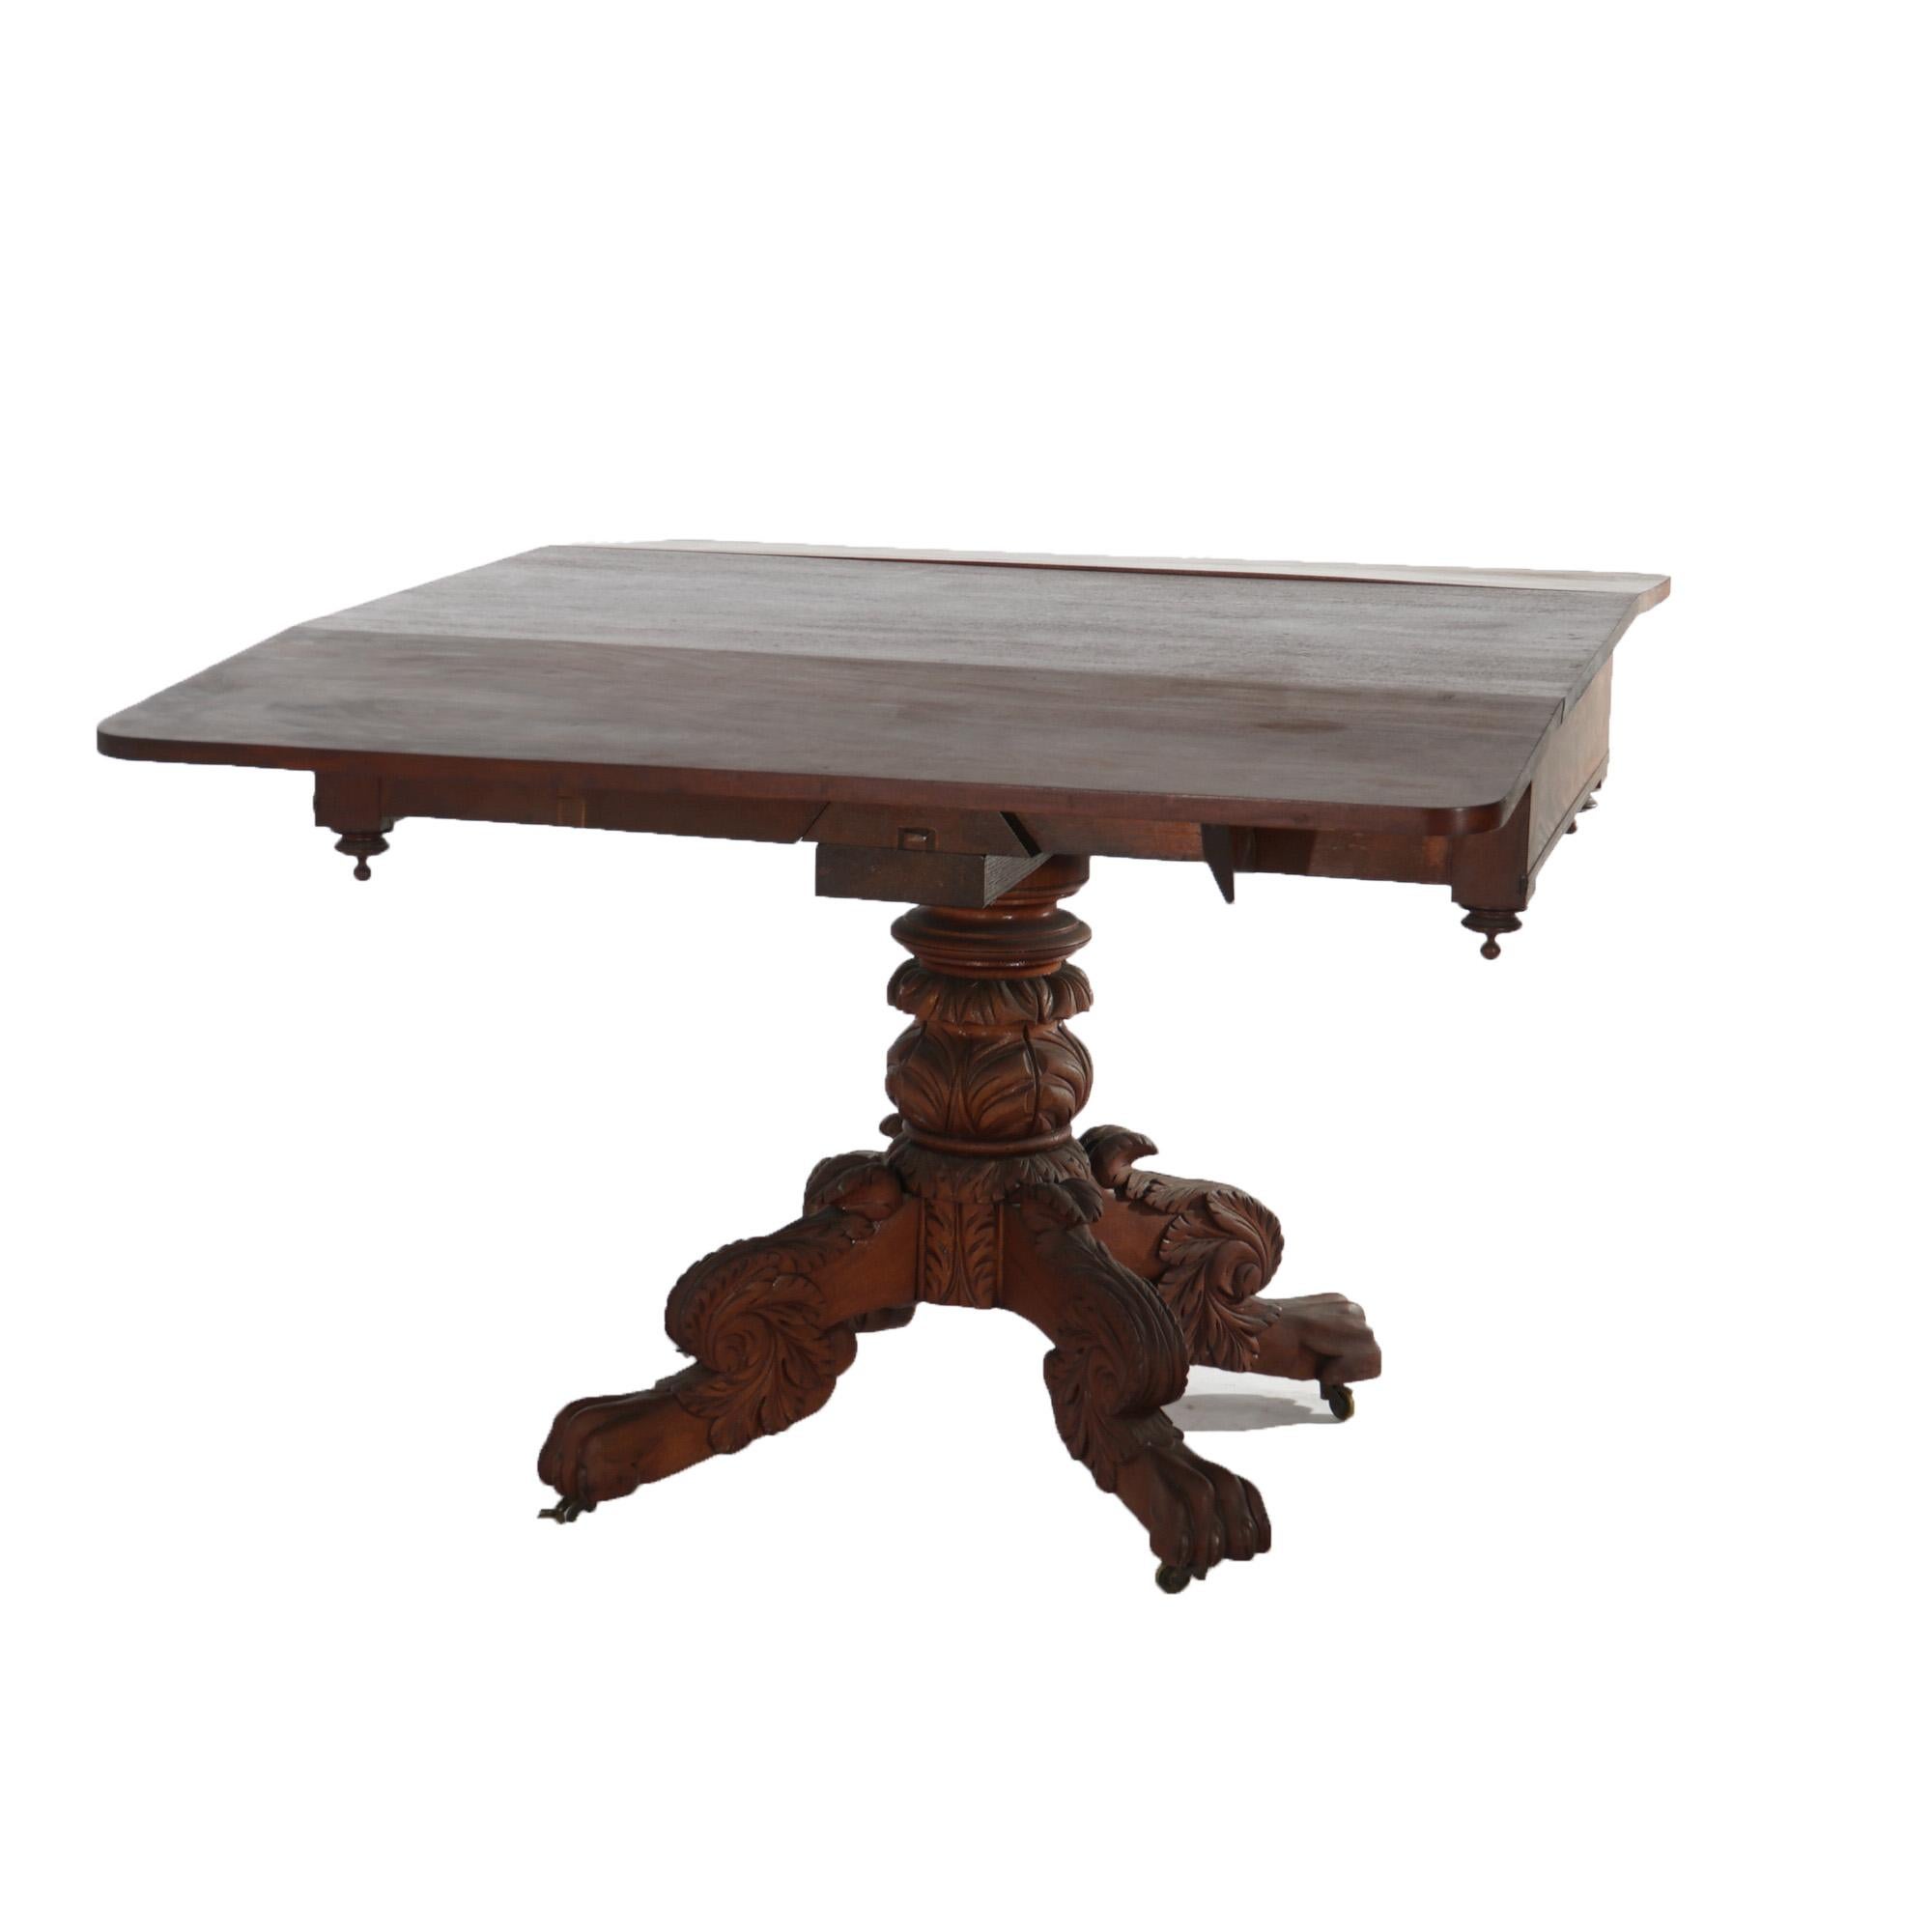 Antique Neoclassical American Empire Carved Flame Mahogany Drop Leaf Table c1880 For Sale 1